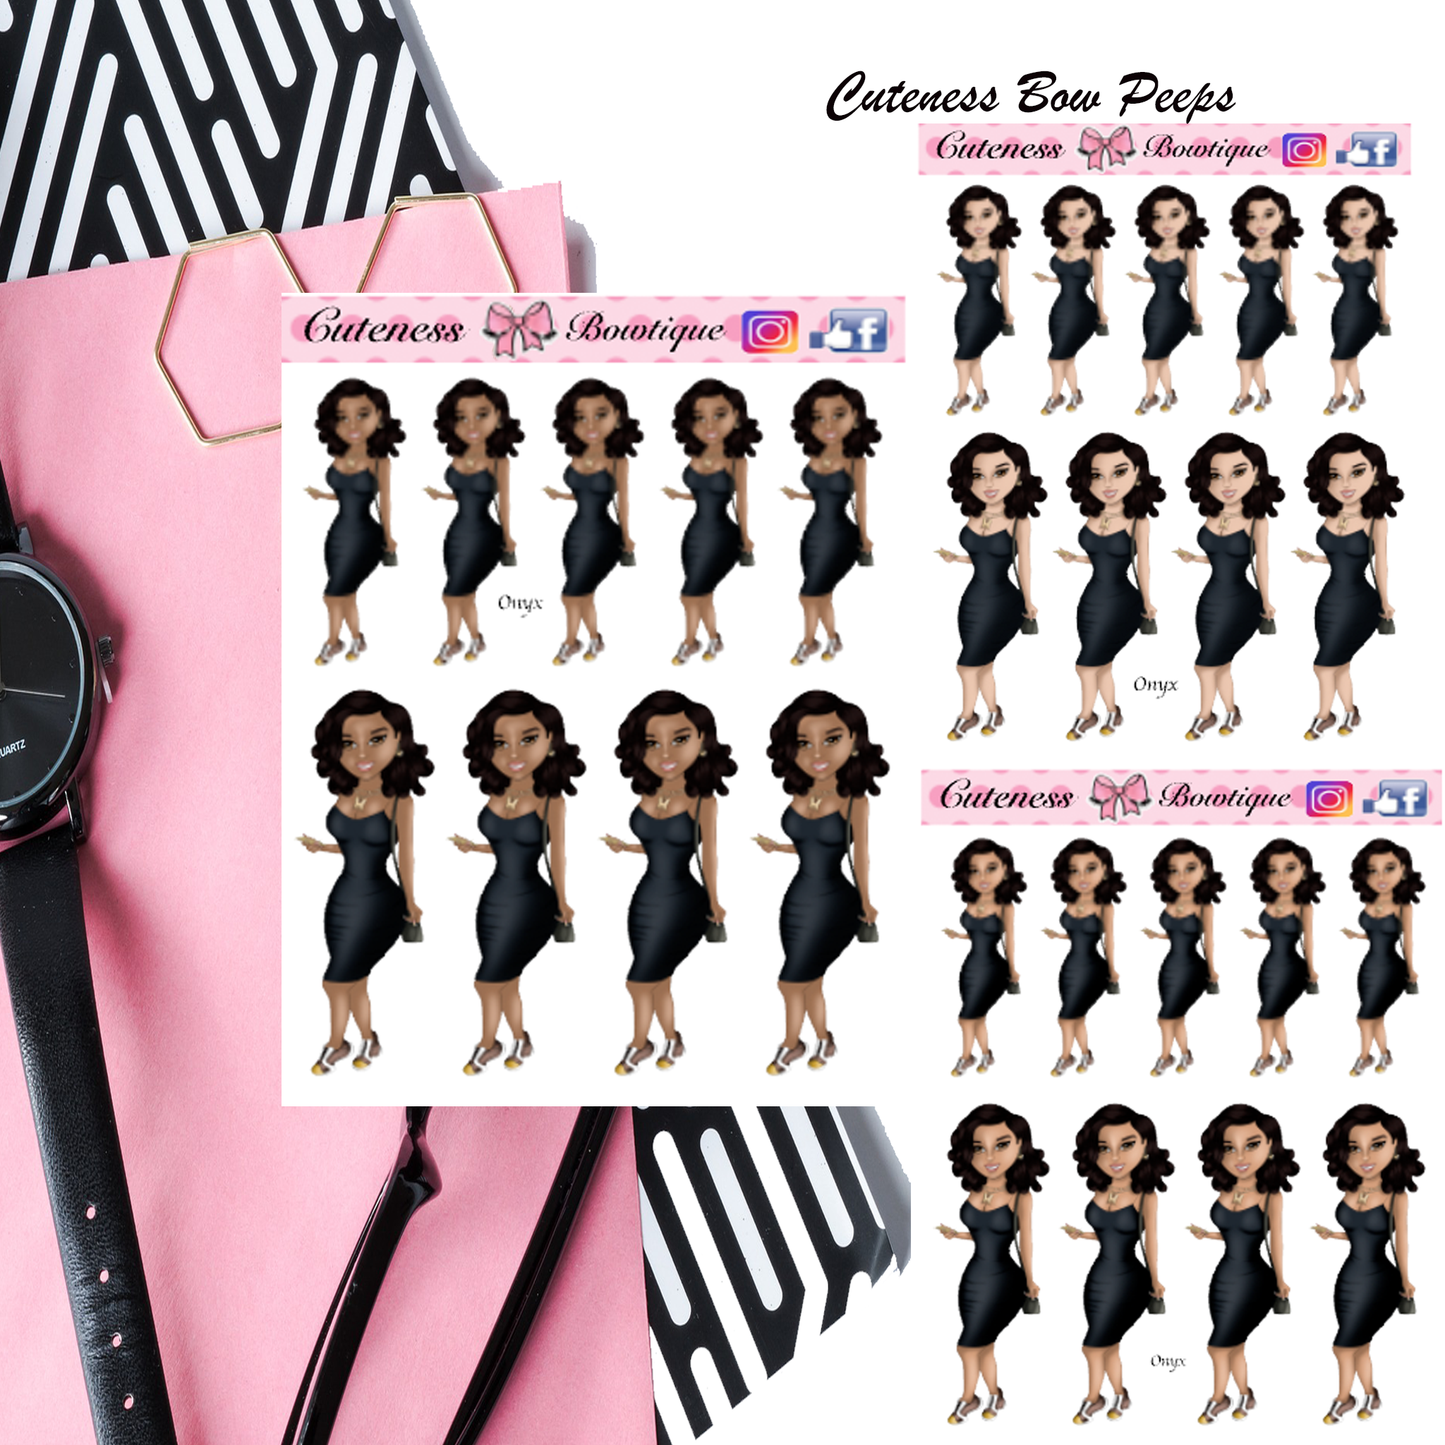 The Cuteness BOW PEEPS  Doll Collection Sticker Sheet | Cuteness Planner Stickers for Agendas, Planners, Notebooks, Dividers | ONYX